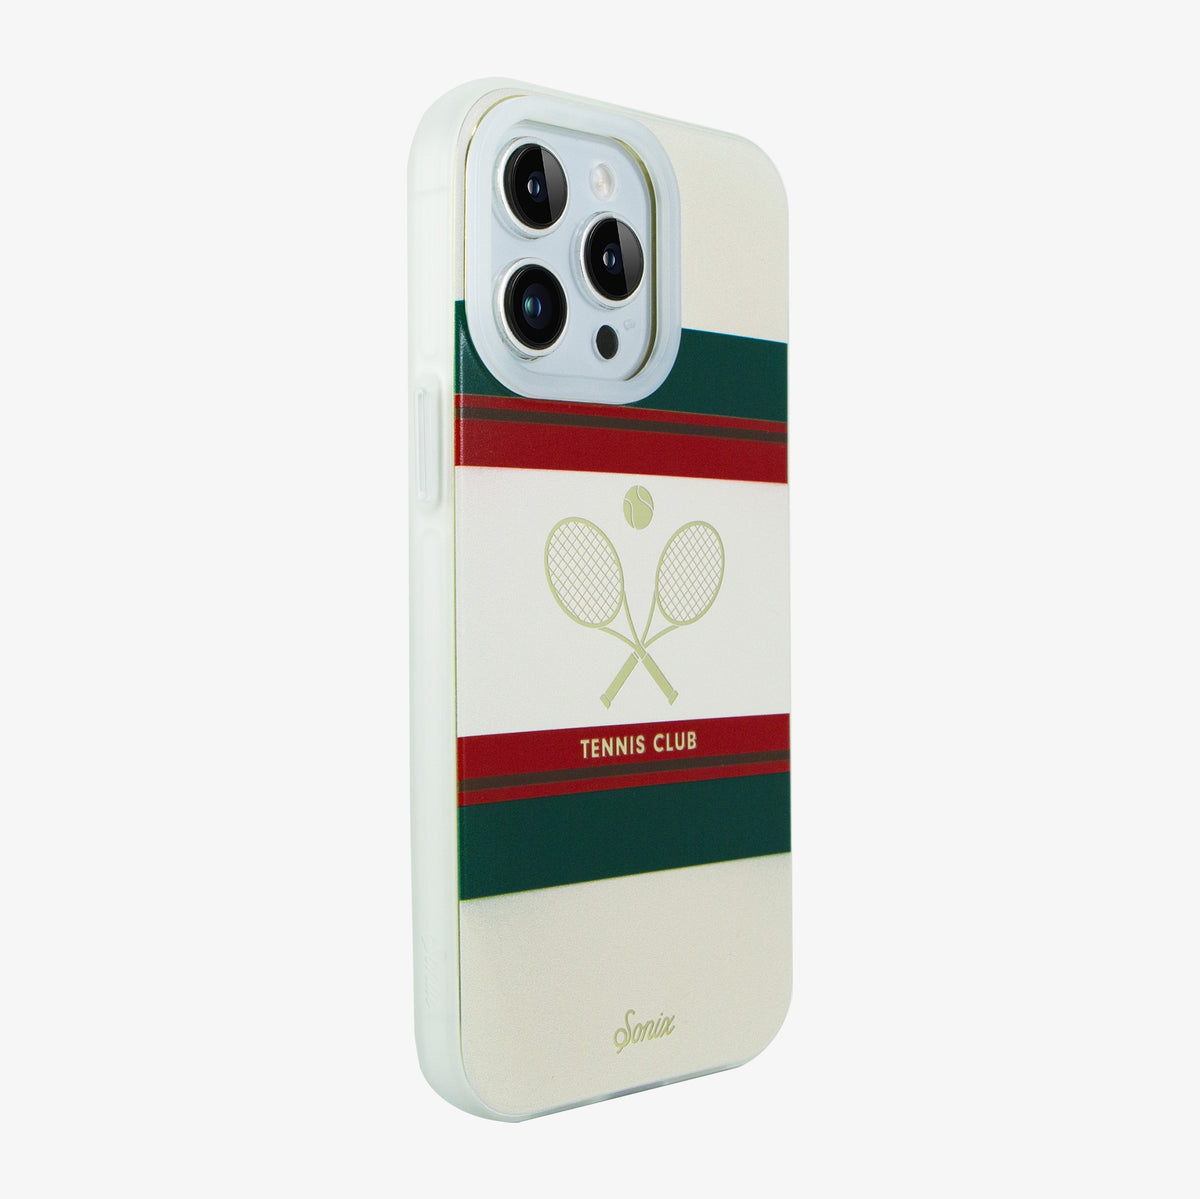 Gucci covers for your iPhone and iPad